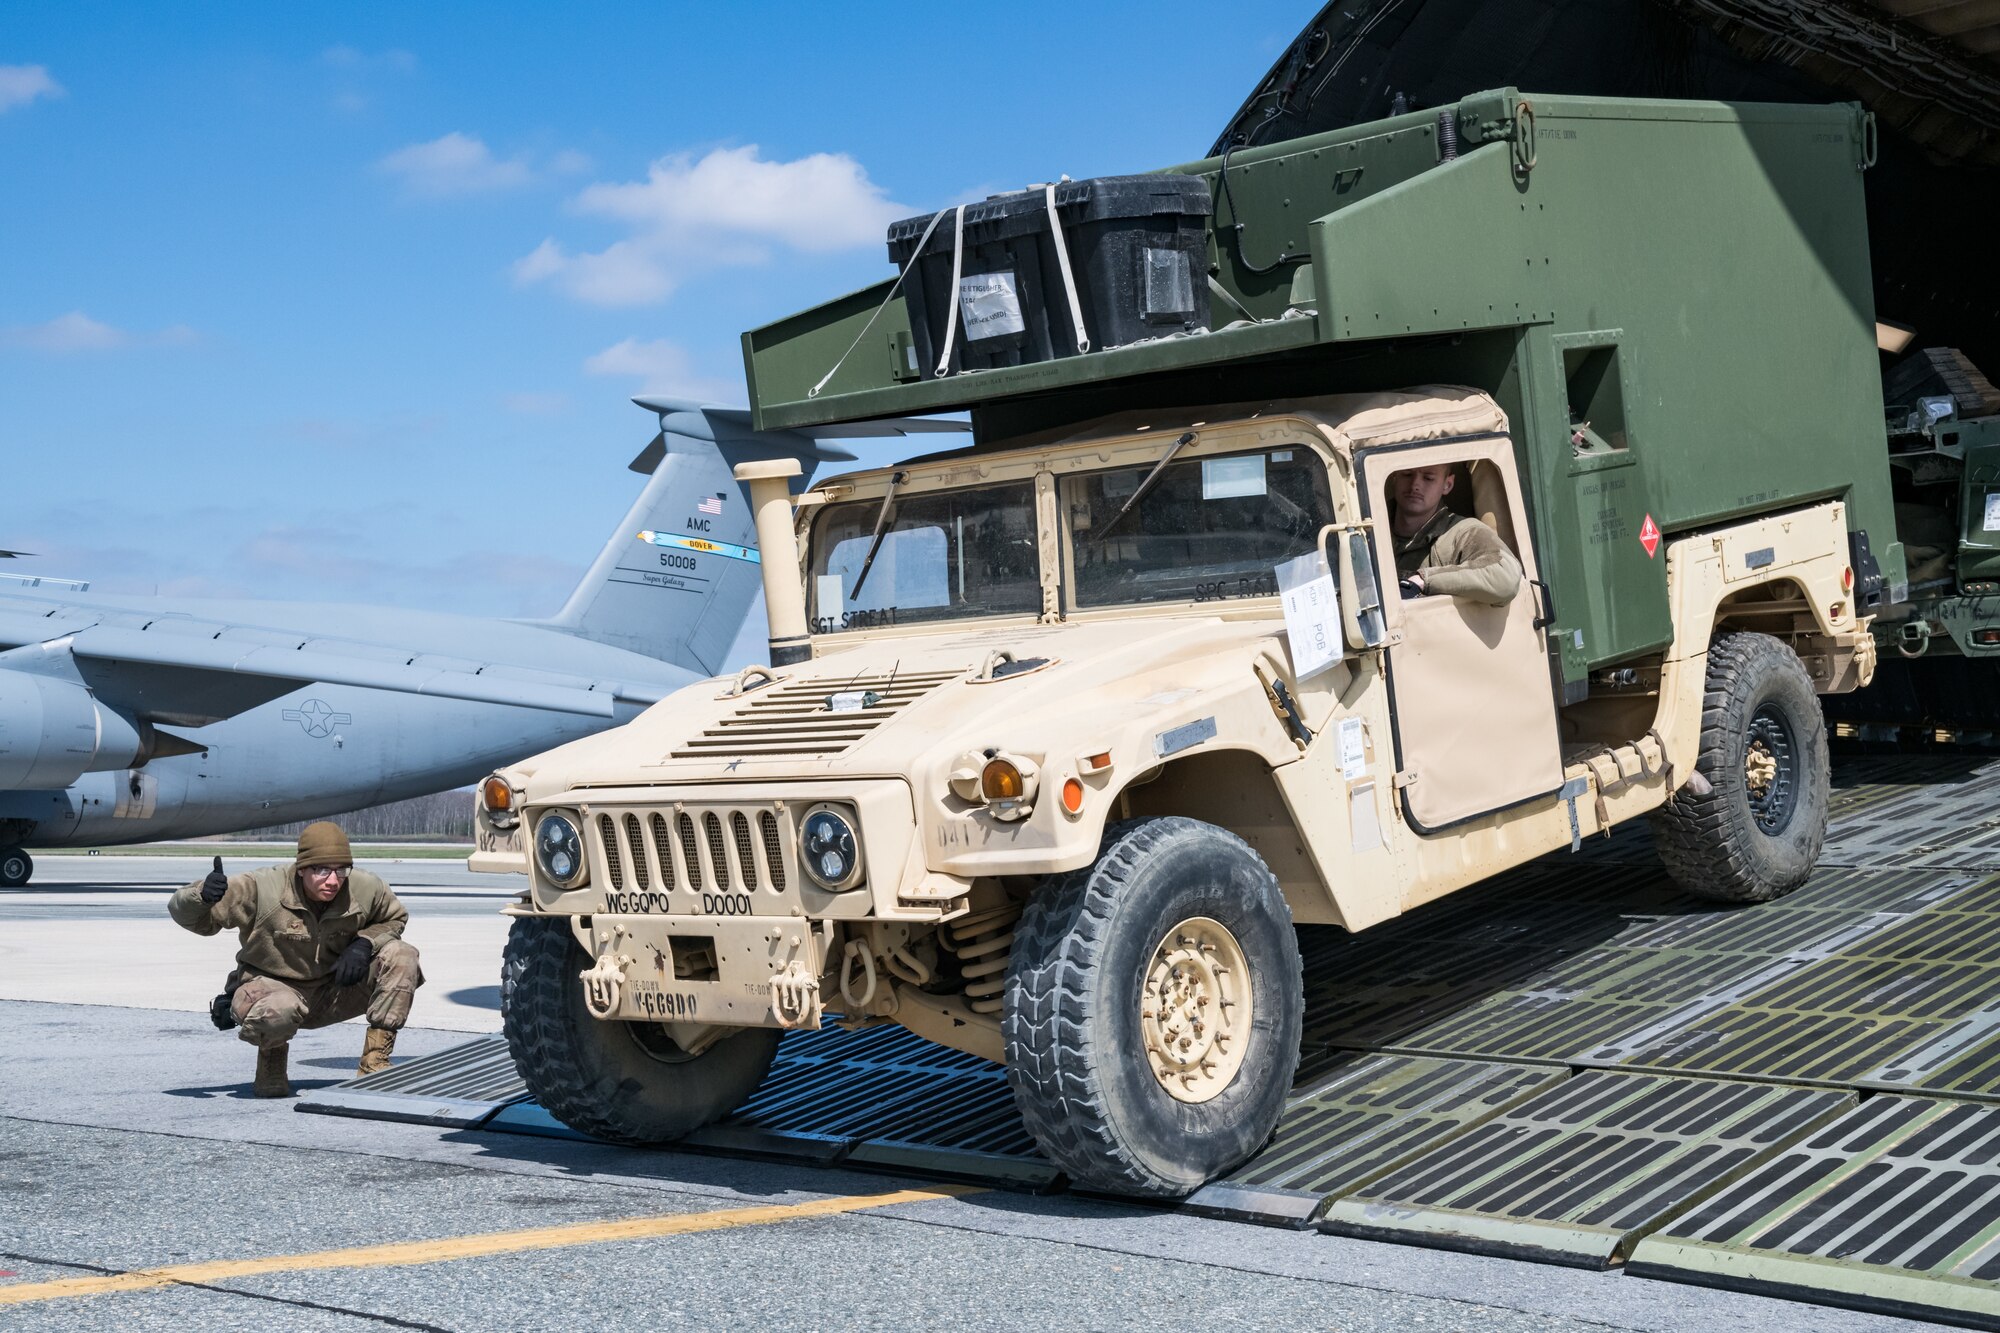 Senior Airmen Terry Brantley, left, clears Cody Kuszajewski, both 436th Aerial Port Squadron ramp specialists, to drive a humvee down the forward loading ramp of a C-5M Super Galaxy, March 26, 2020, at Dover Air Force Base, Delaware. Brantley, Kuszajewski and other 436th APS members unloaded numerous humvees off the Super Galaxy as required airlift operations continued during the evolving COVID-19 pandemic. (U.S. Air Force photo by Roland Balik)